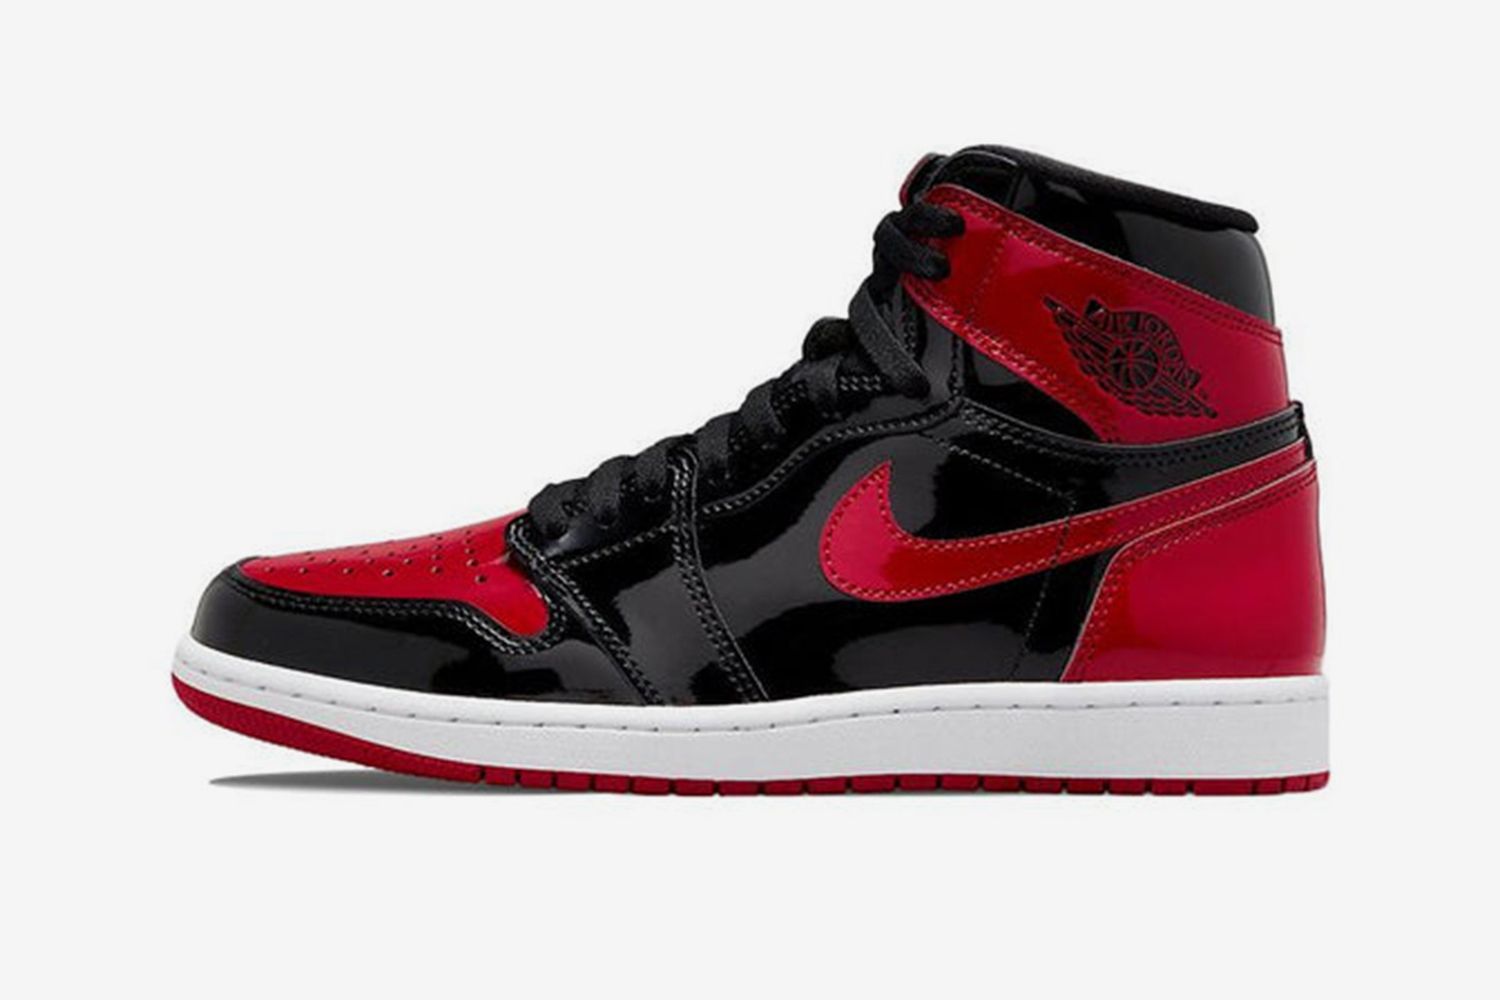 Campaña comedia Saludo 10 of the Best Jordan 1 High Colorways for 2022